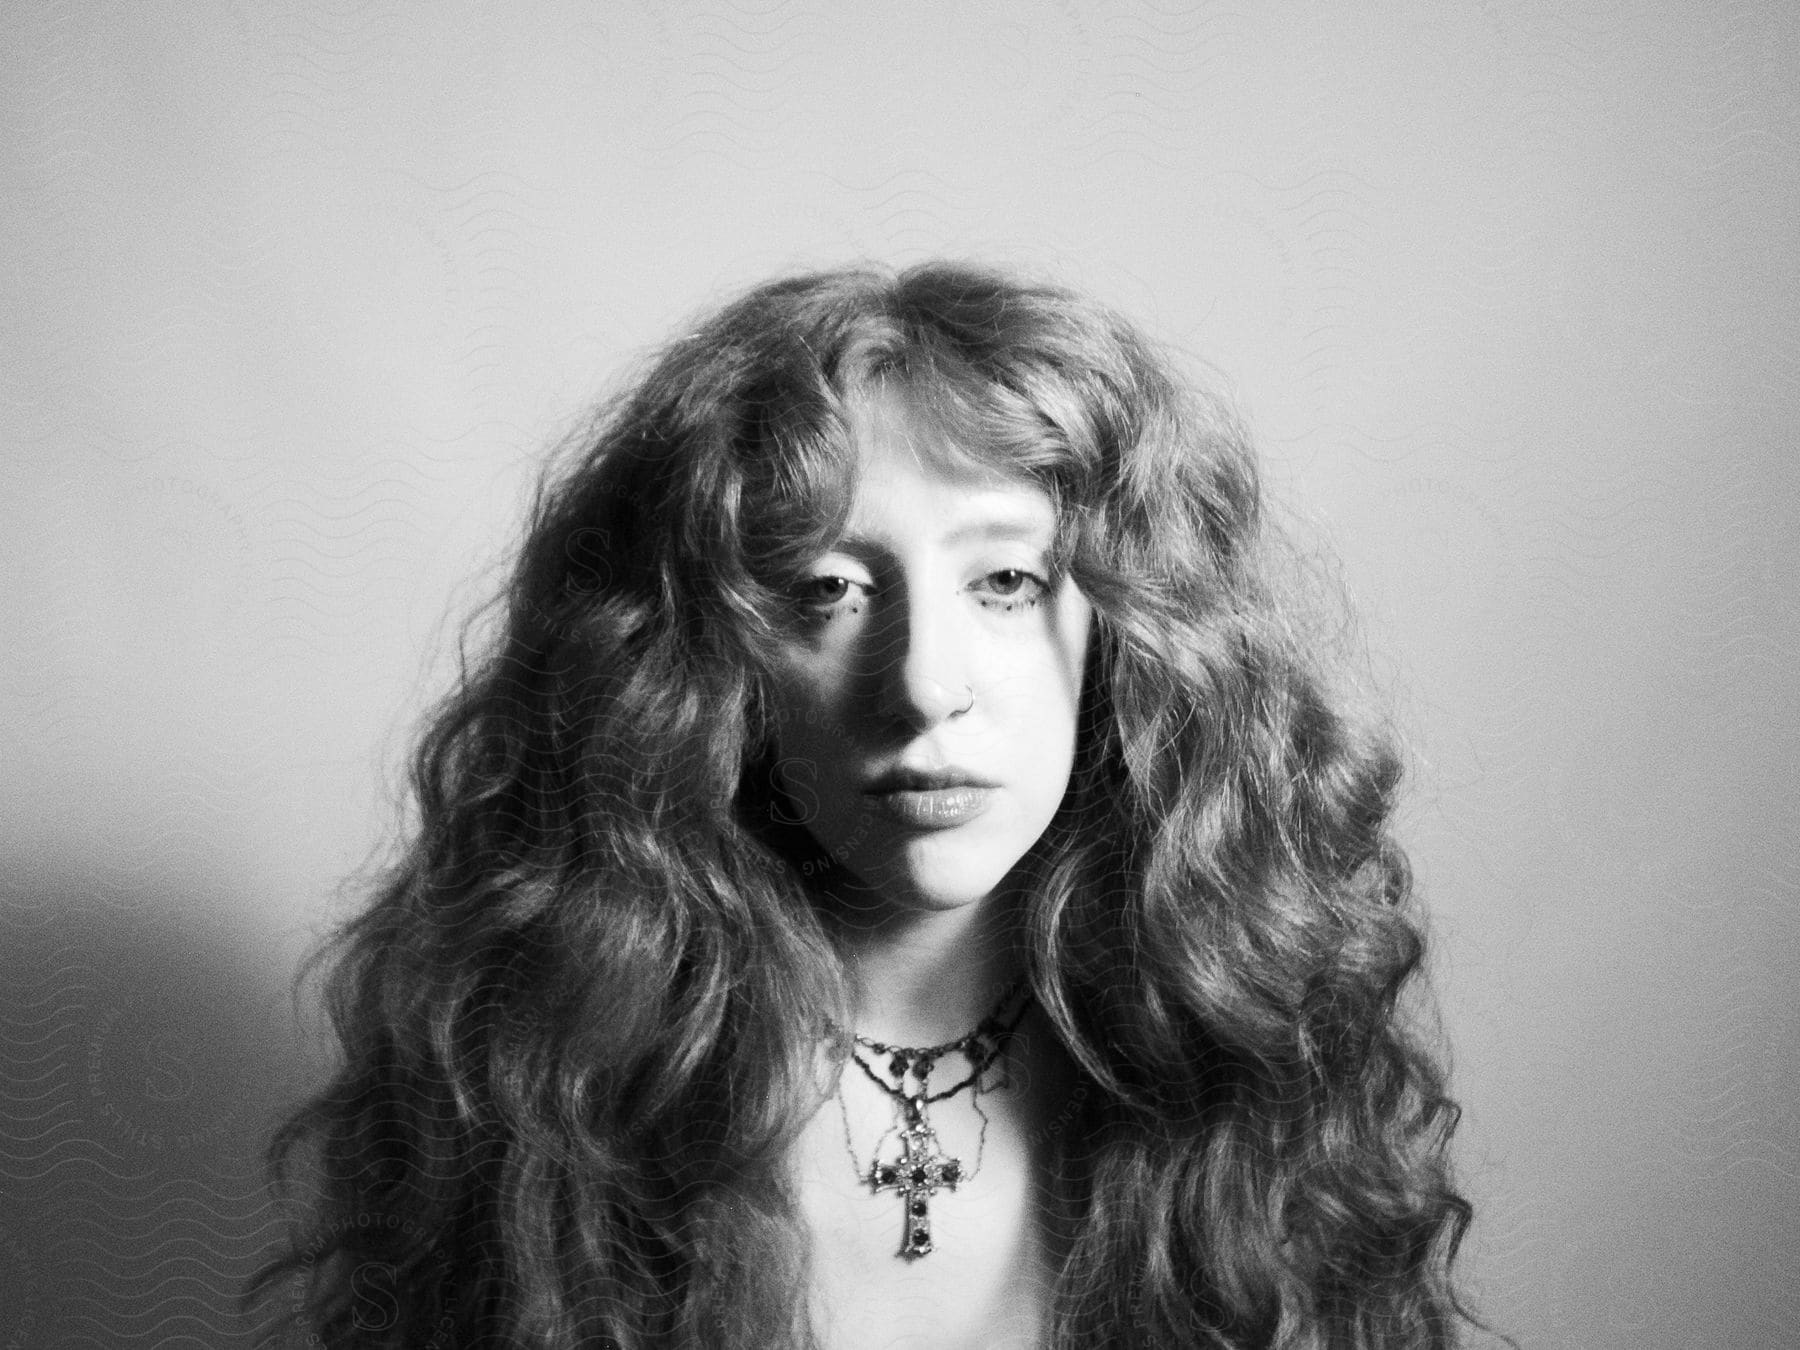 The face of a woman who is posing looking forward with big wavy hair and she is wearing a necklace with a cross and is in black and white tones